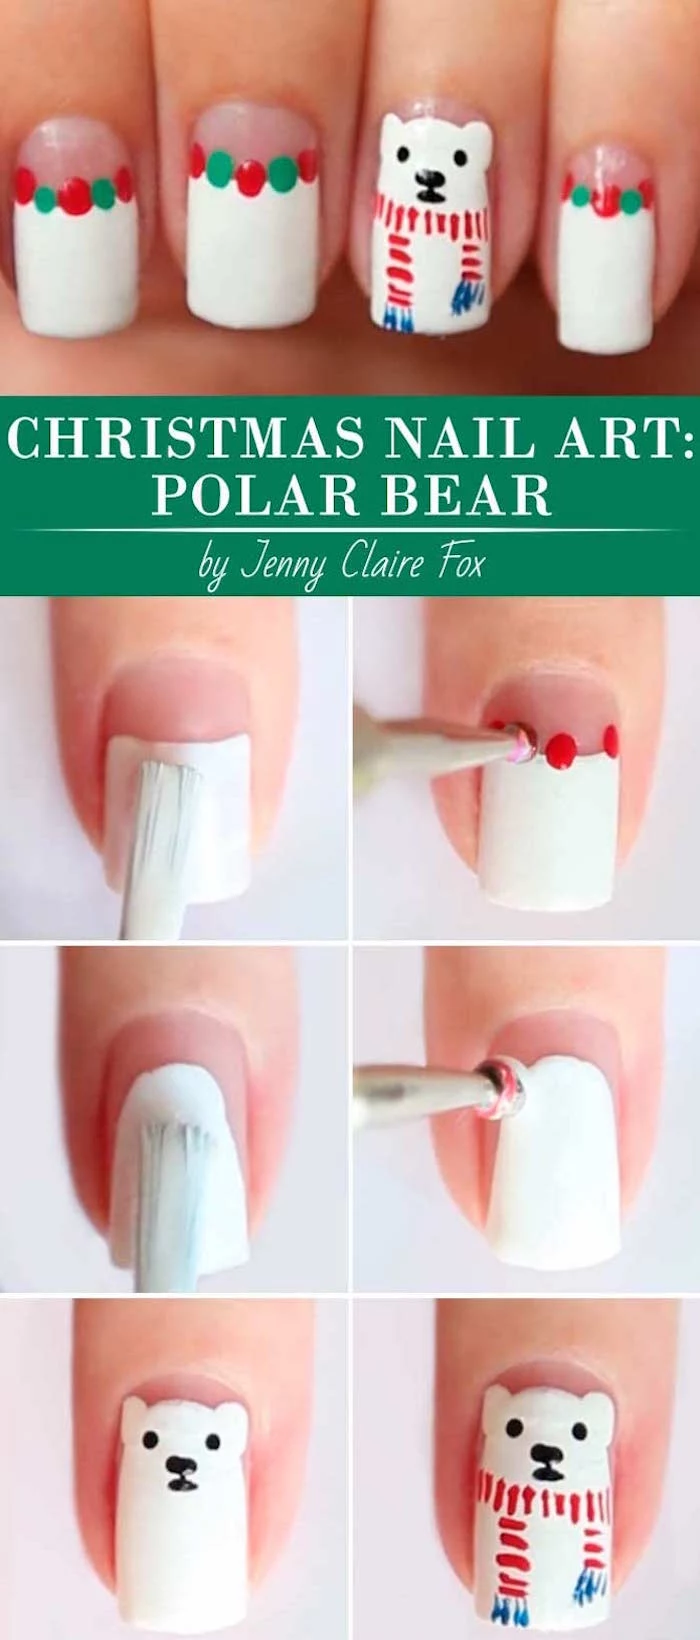 green and white dots on white nail polish simple christmas nails step by step diy tutorial for polar bear decoration